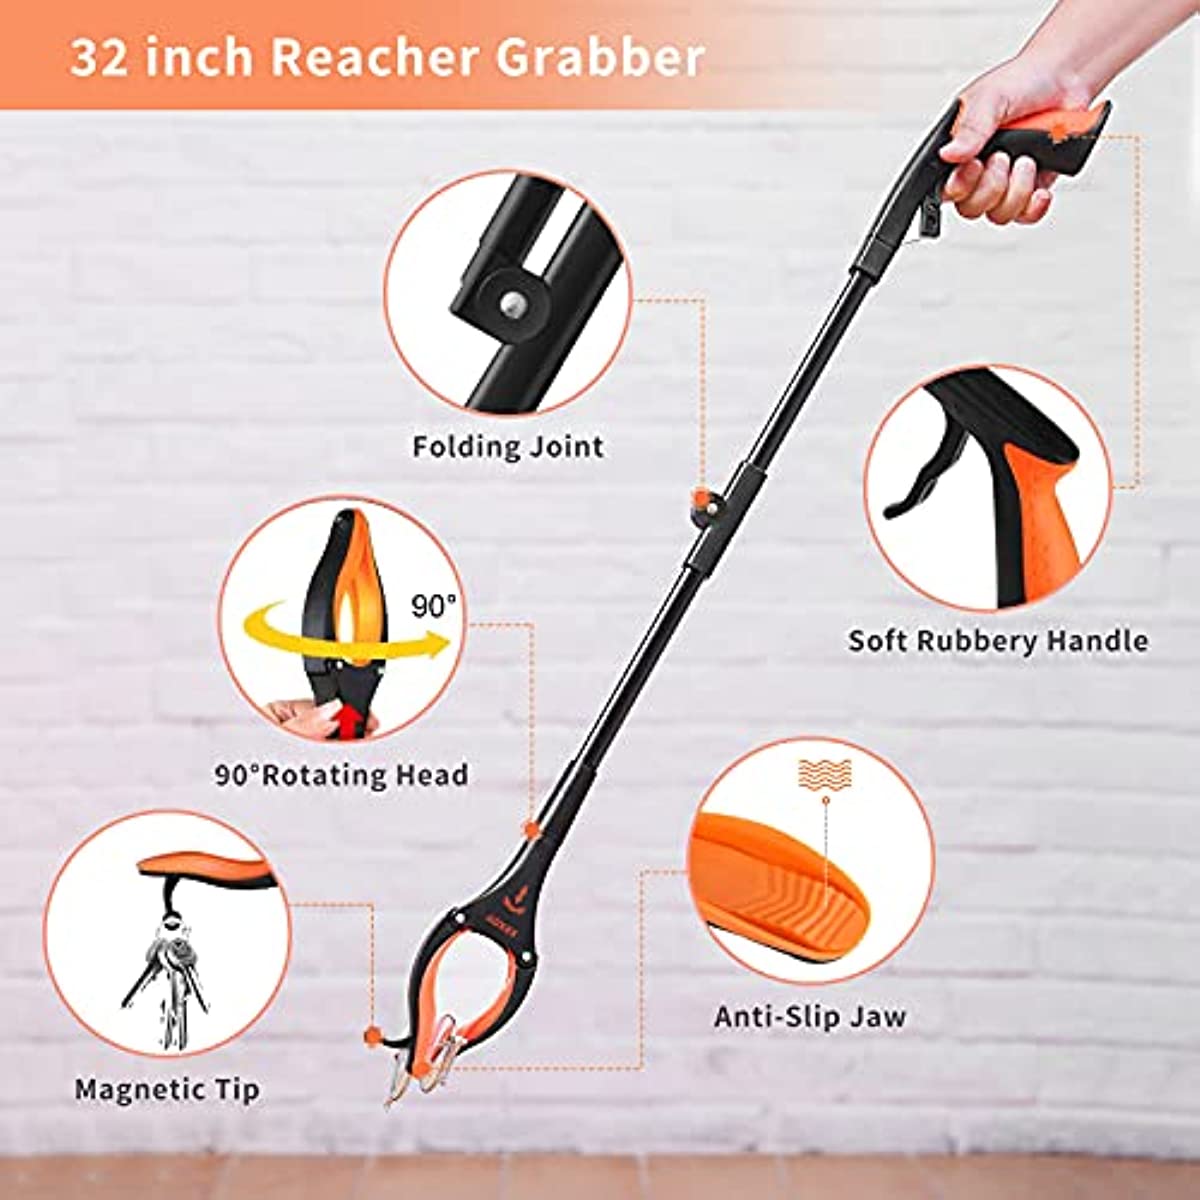 7 In 1 Hip Knee Back Replacement Recovery Kit With 32\" Grabber Reacher Tool, Slick Sock Aid, Sturdy Long Shoe Horn & Dressing Stick, Leg Lifter, Bath Sponge, Storage Bag